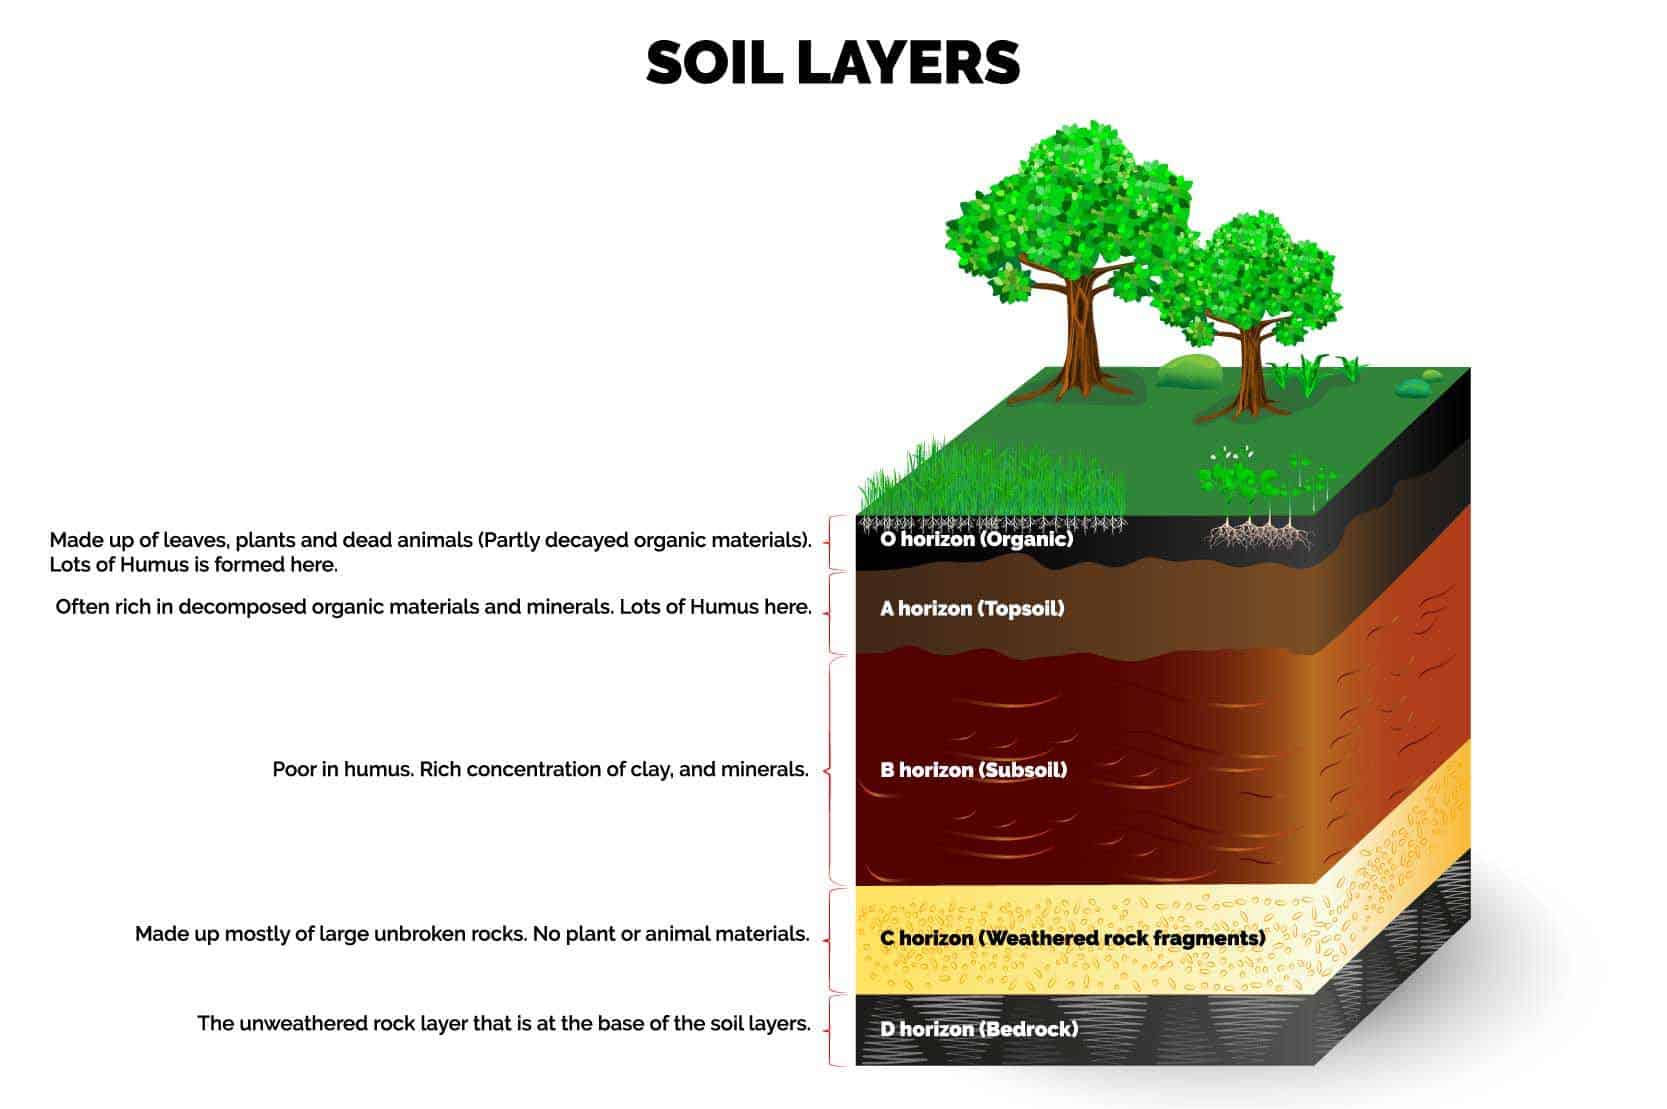 Humus exists in the topsoil layers